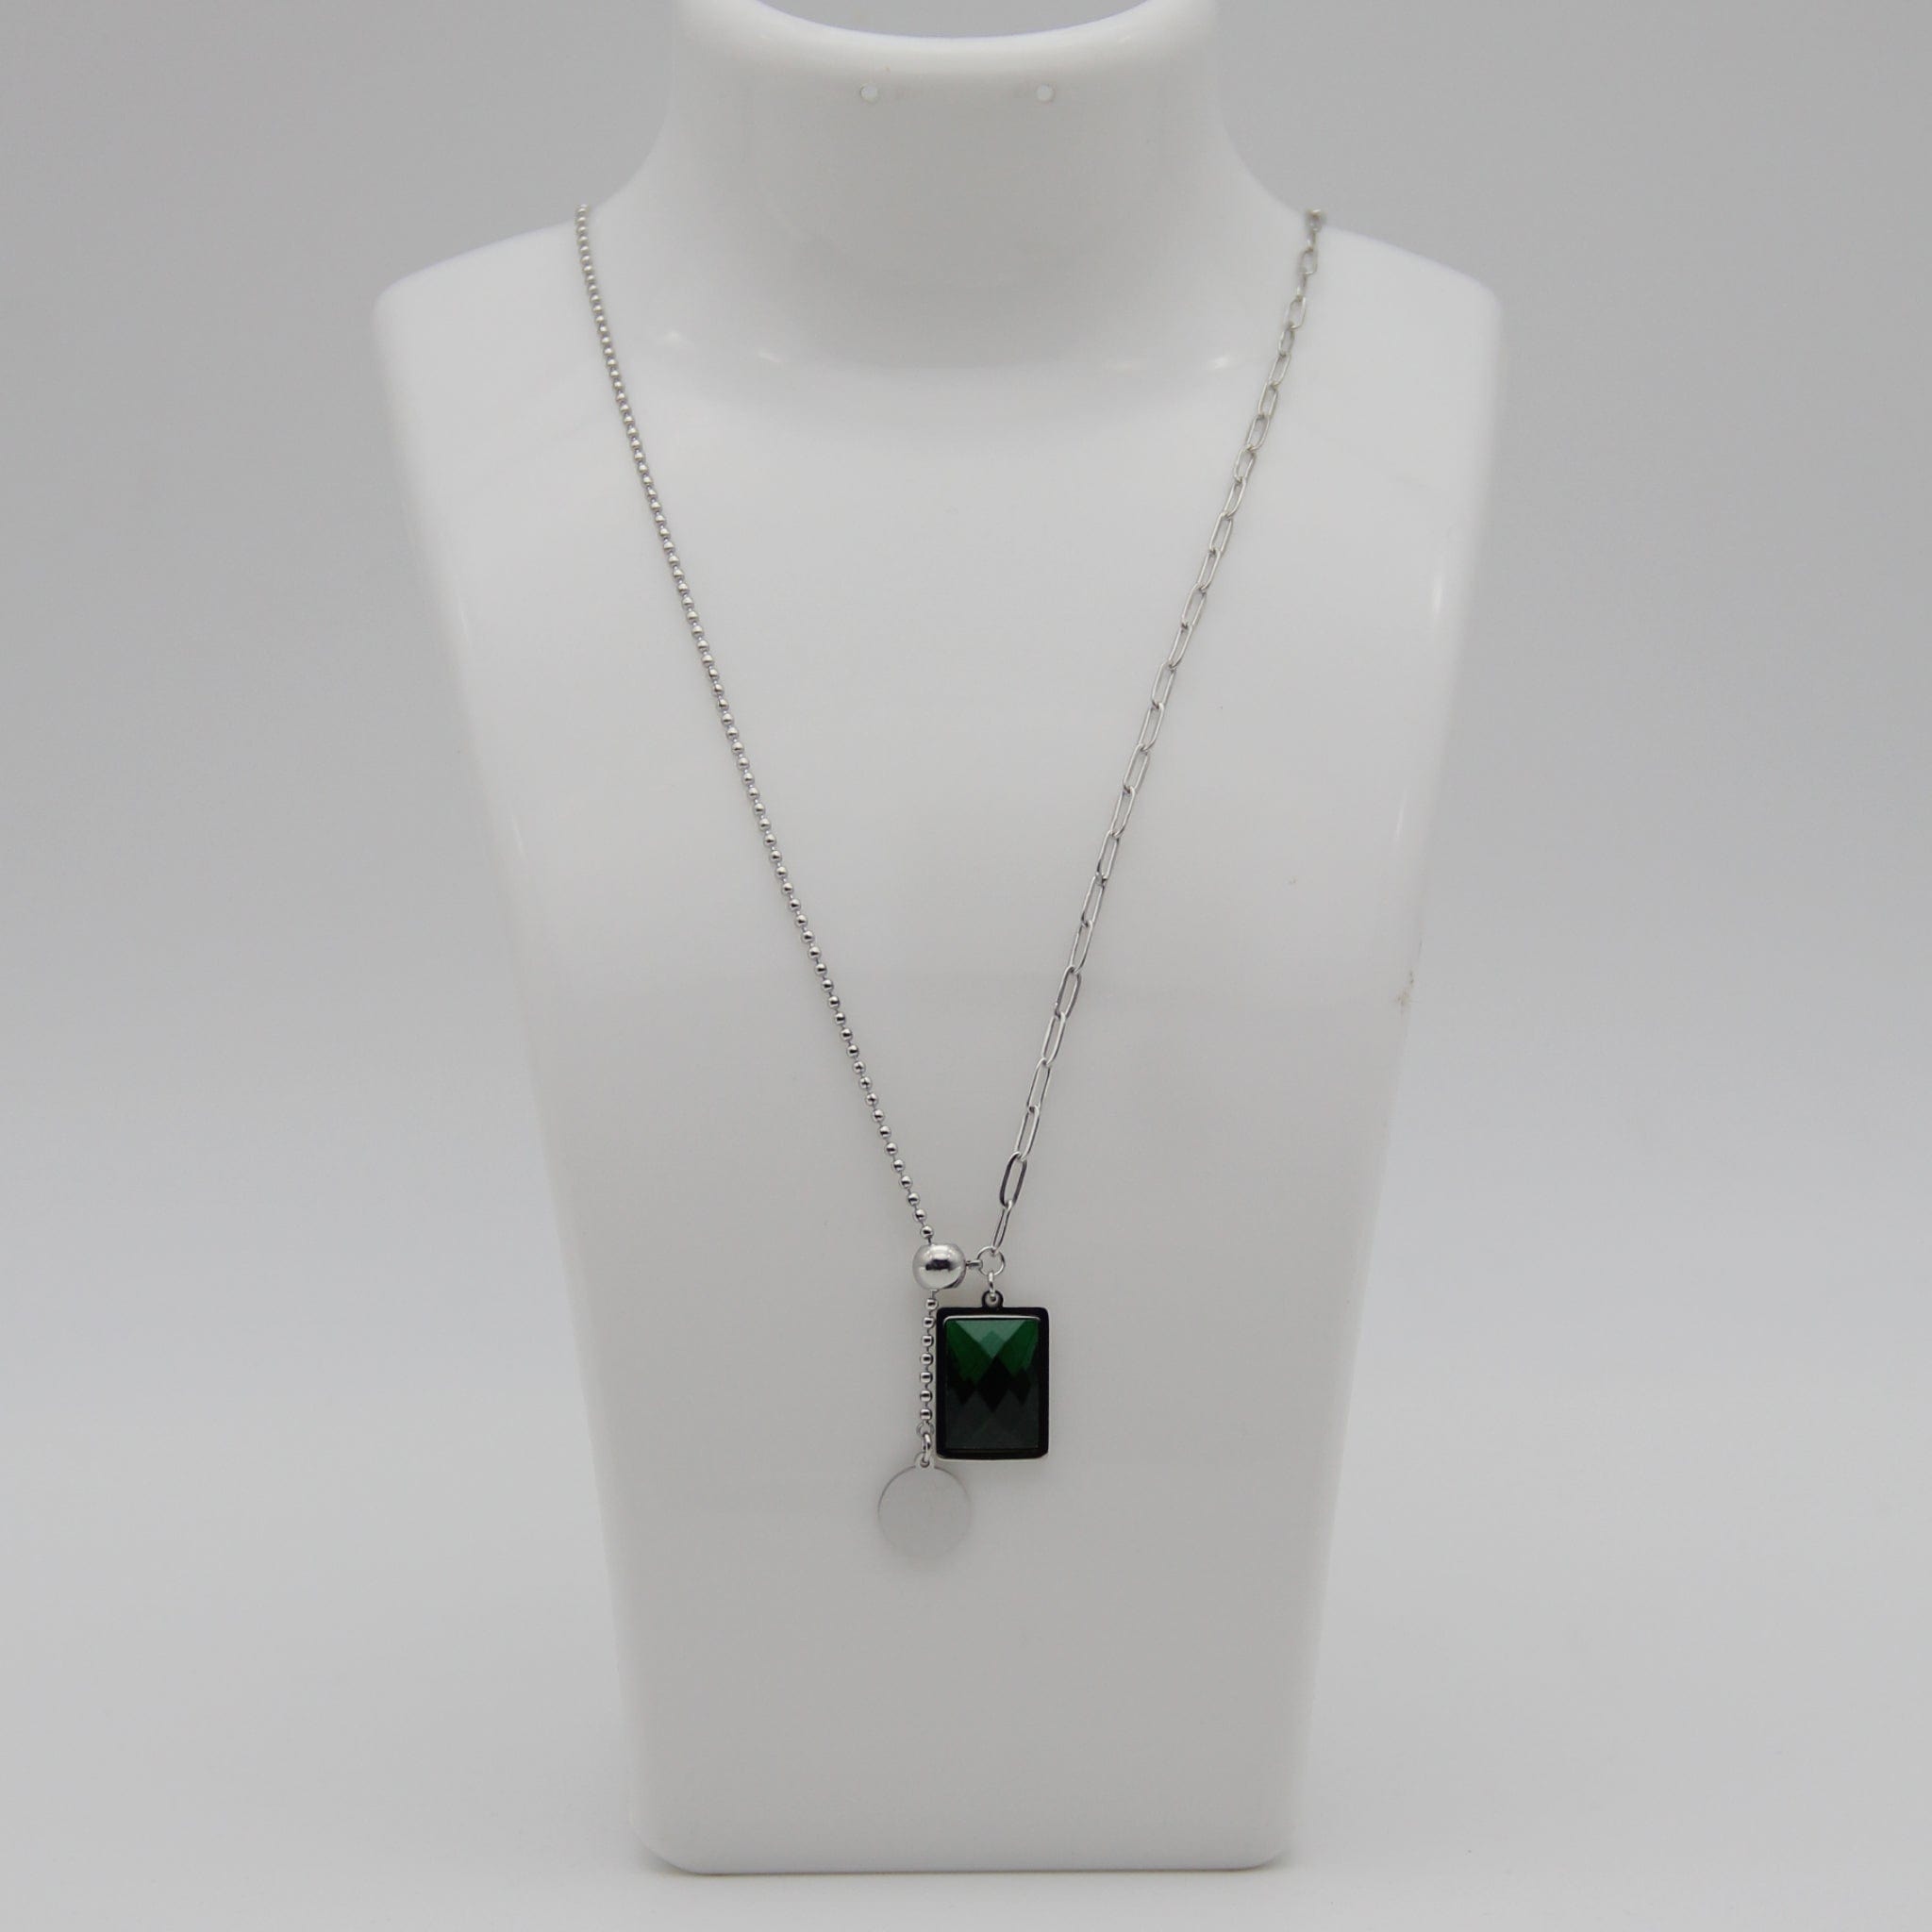 Outlet W&B Female Necklaces Stainless Steel Necklace With Green Stone